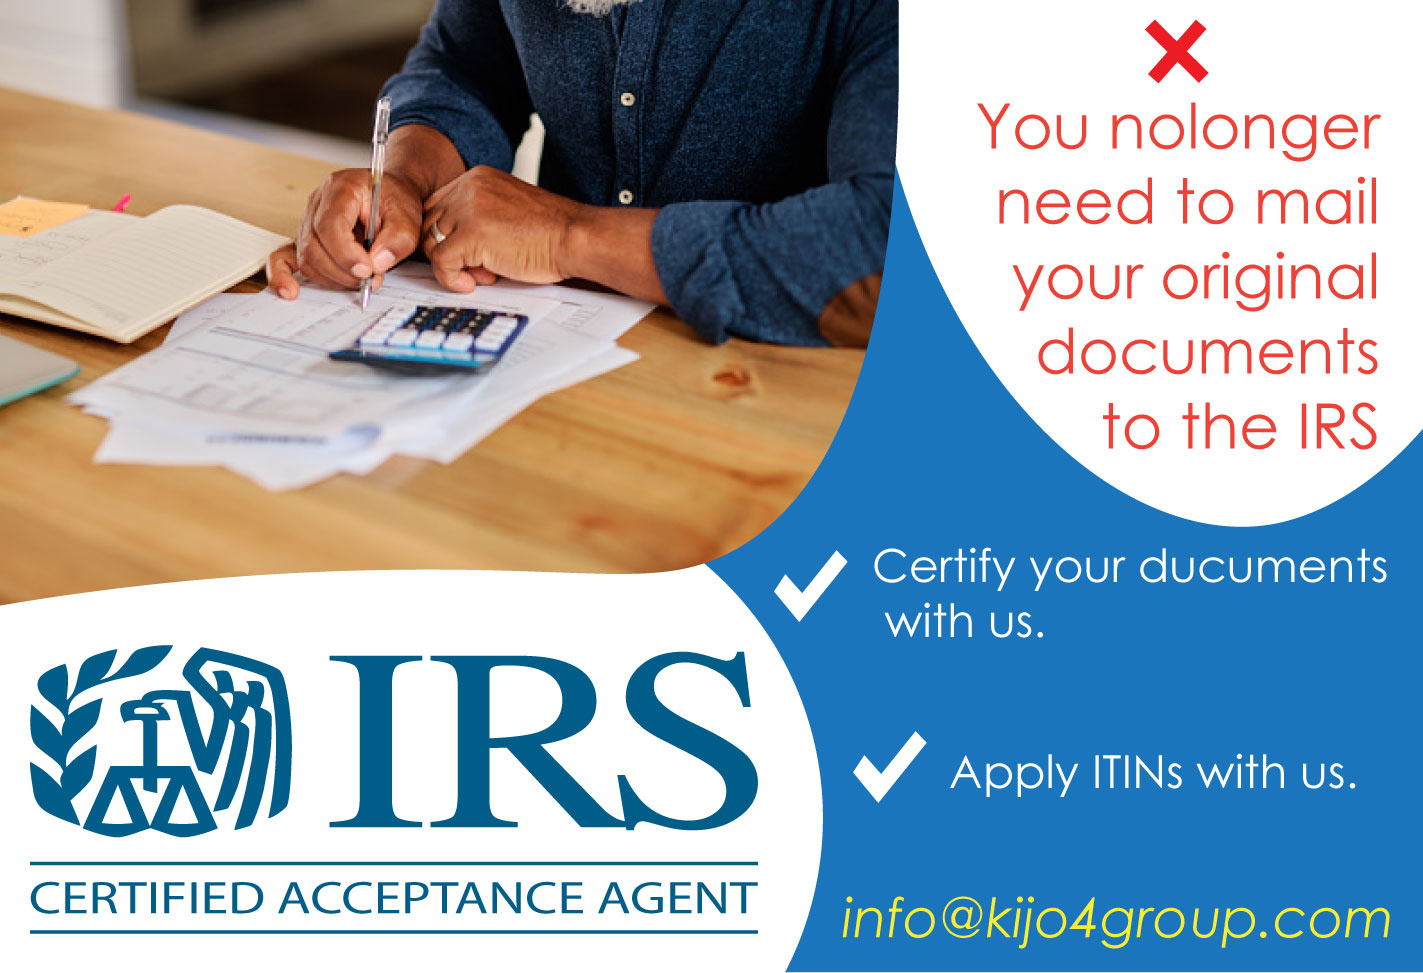 itin-certifying-acceptance-agent